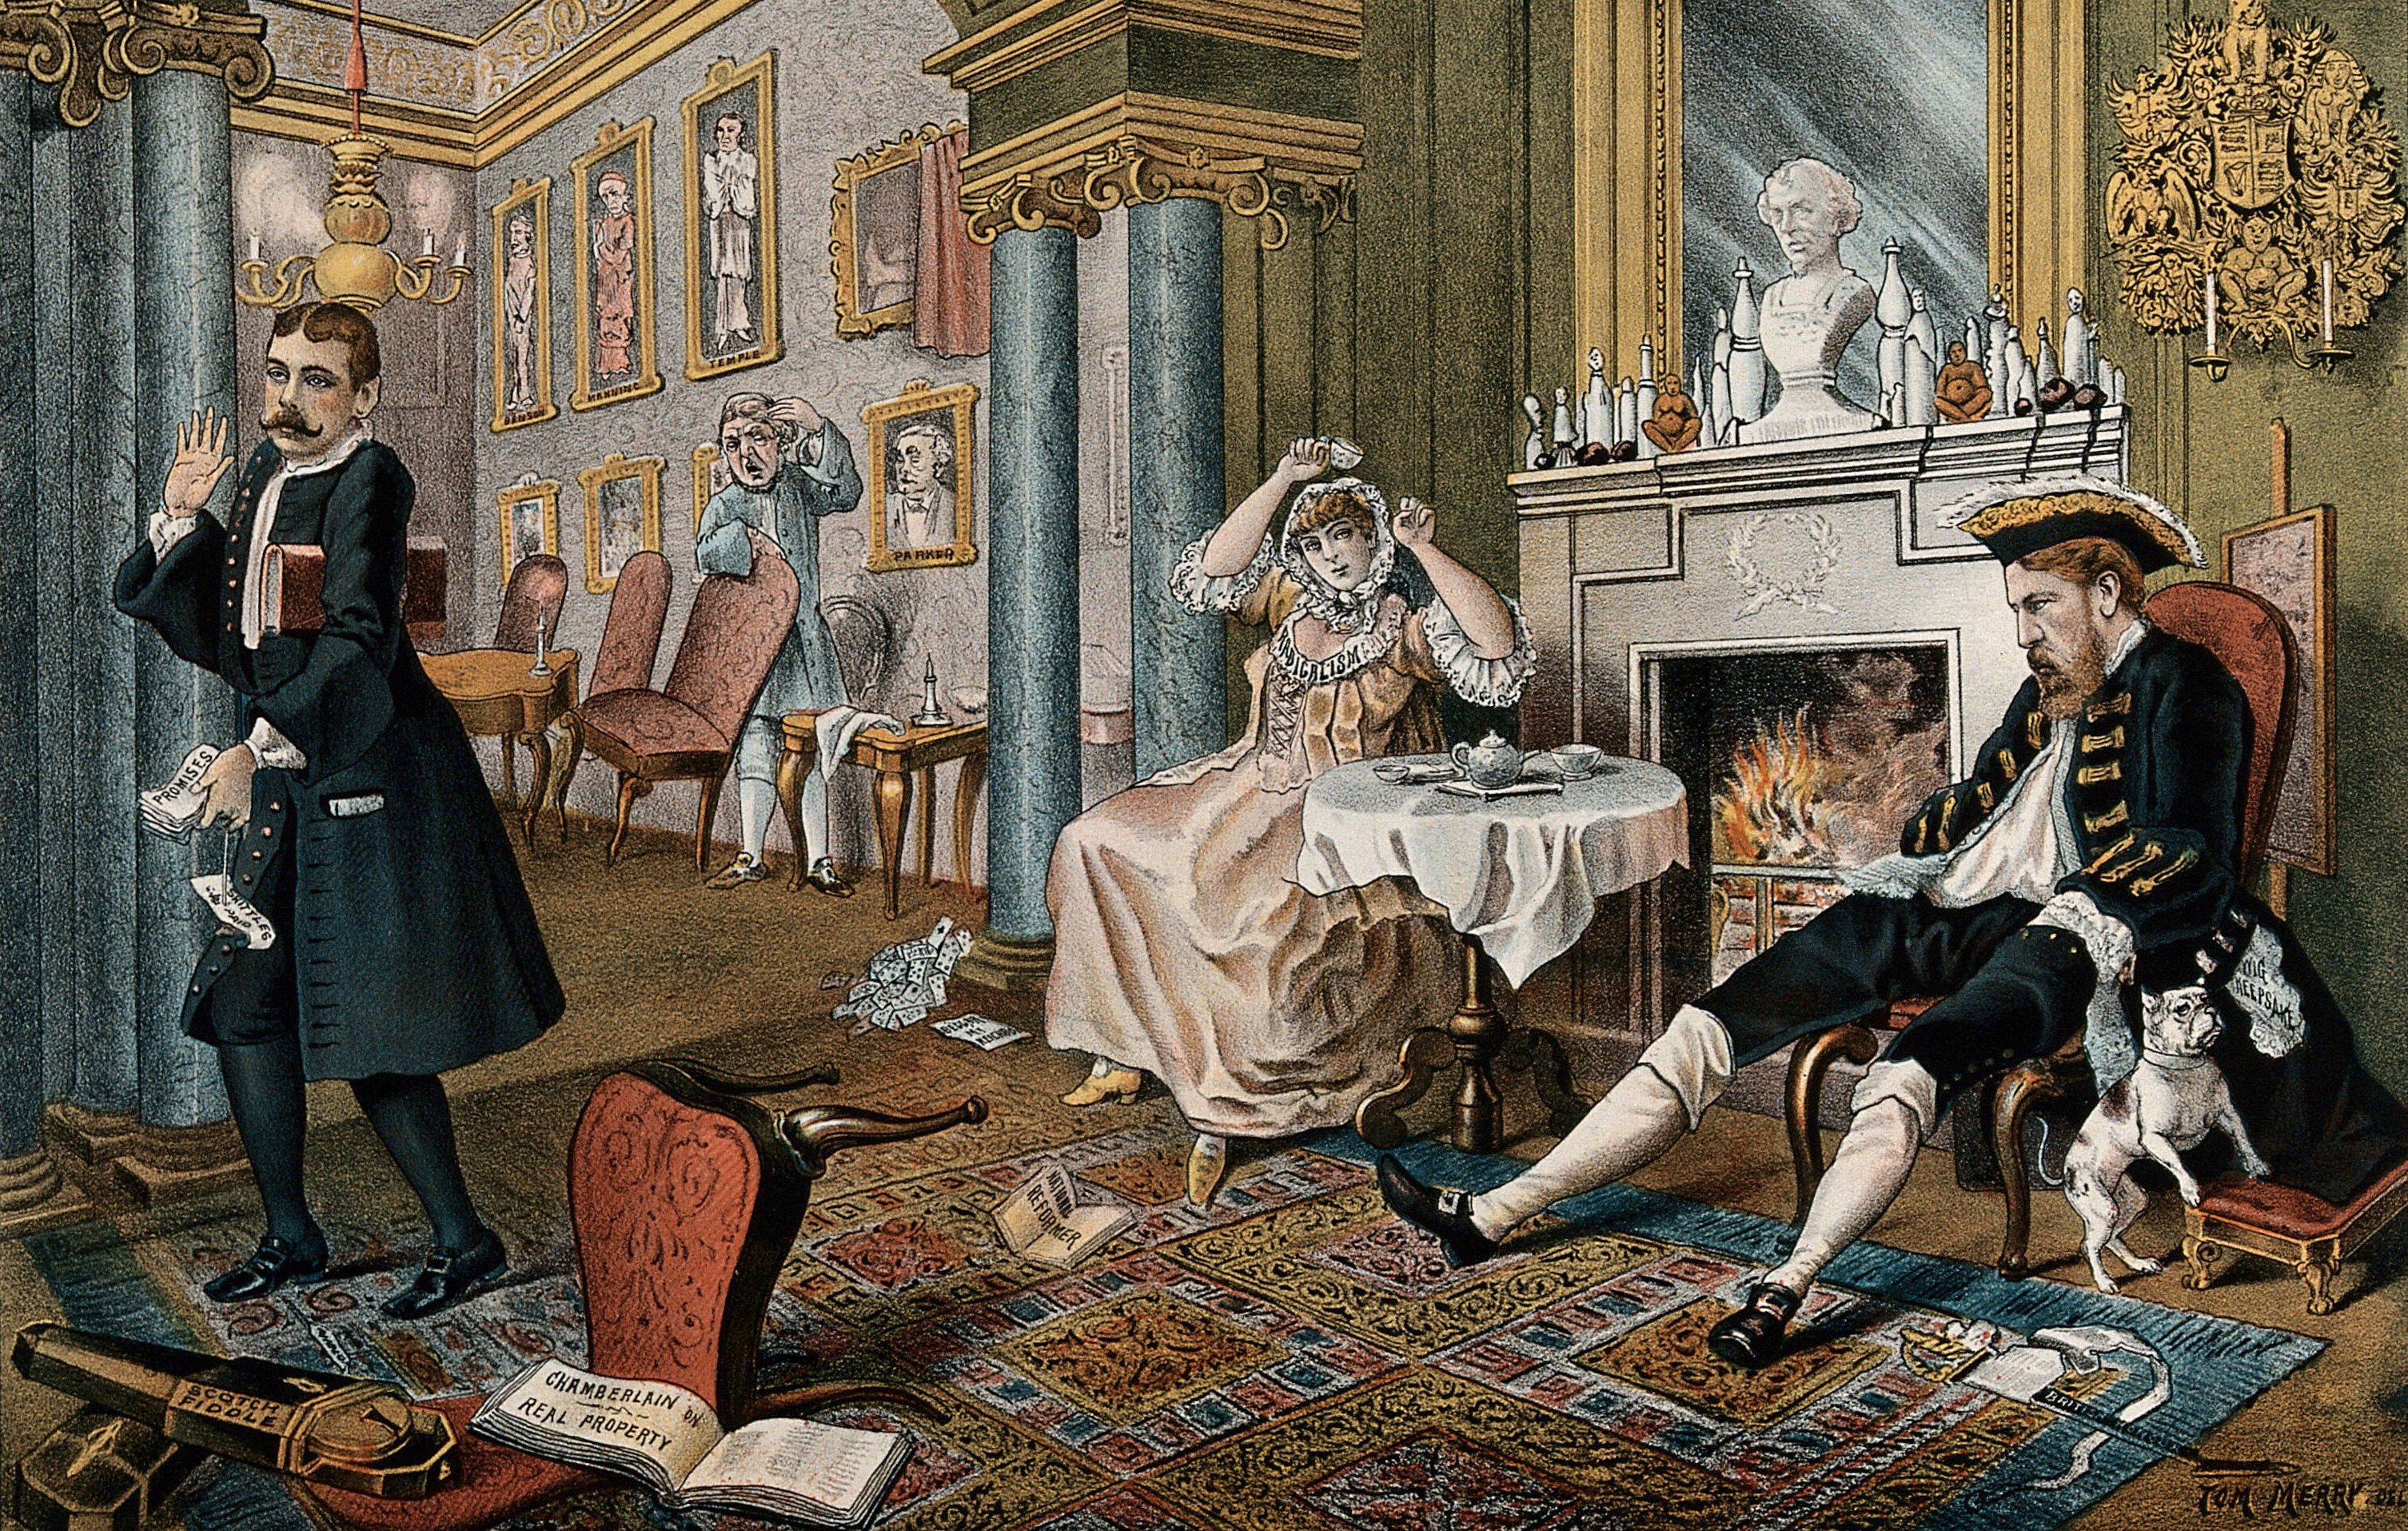 19th-century cartoon of three nobles in a fancy room. There are signs of a debaucherous party such as turned over chairs and hung-over expressions on faces